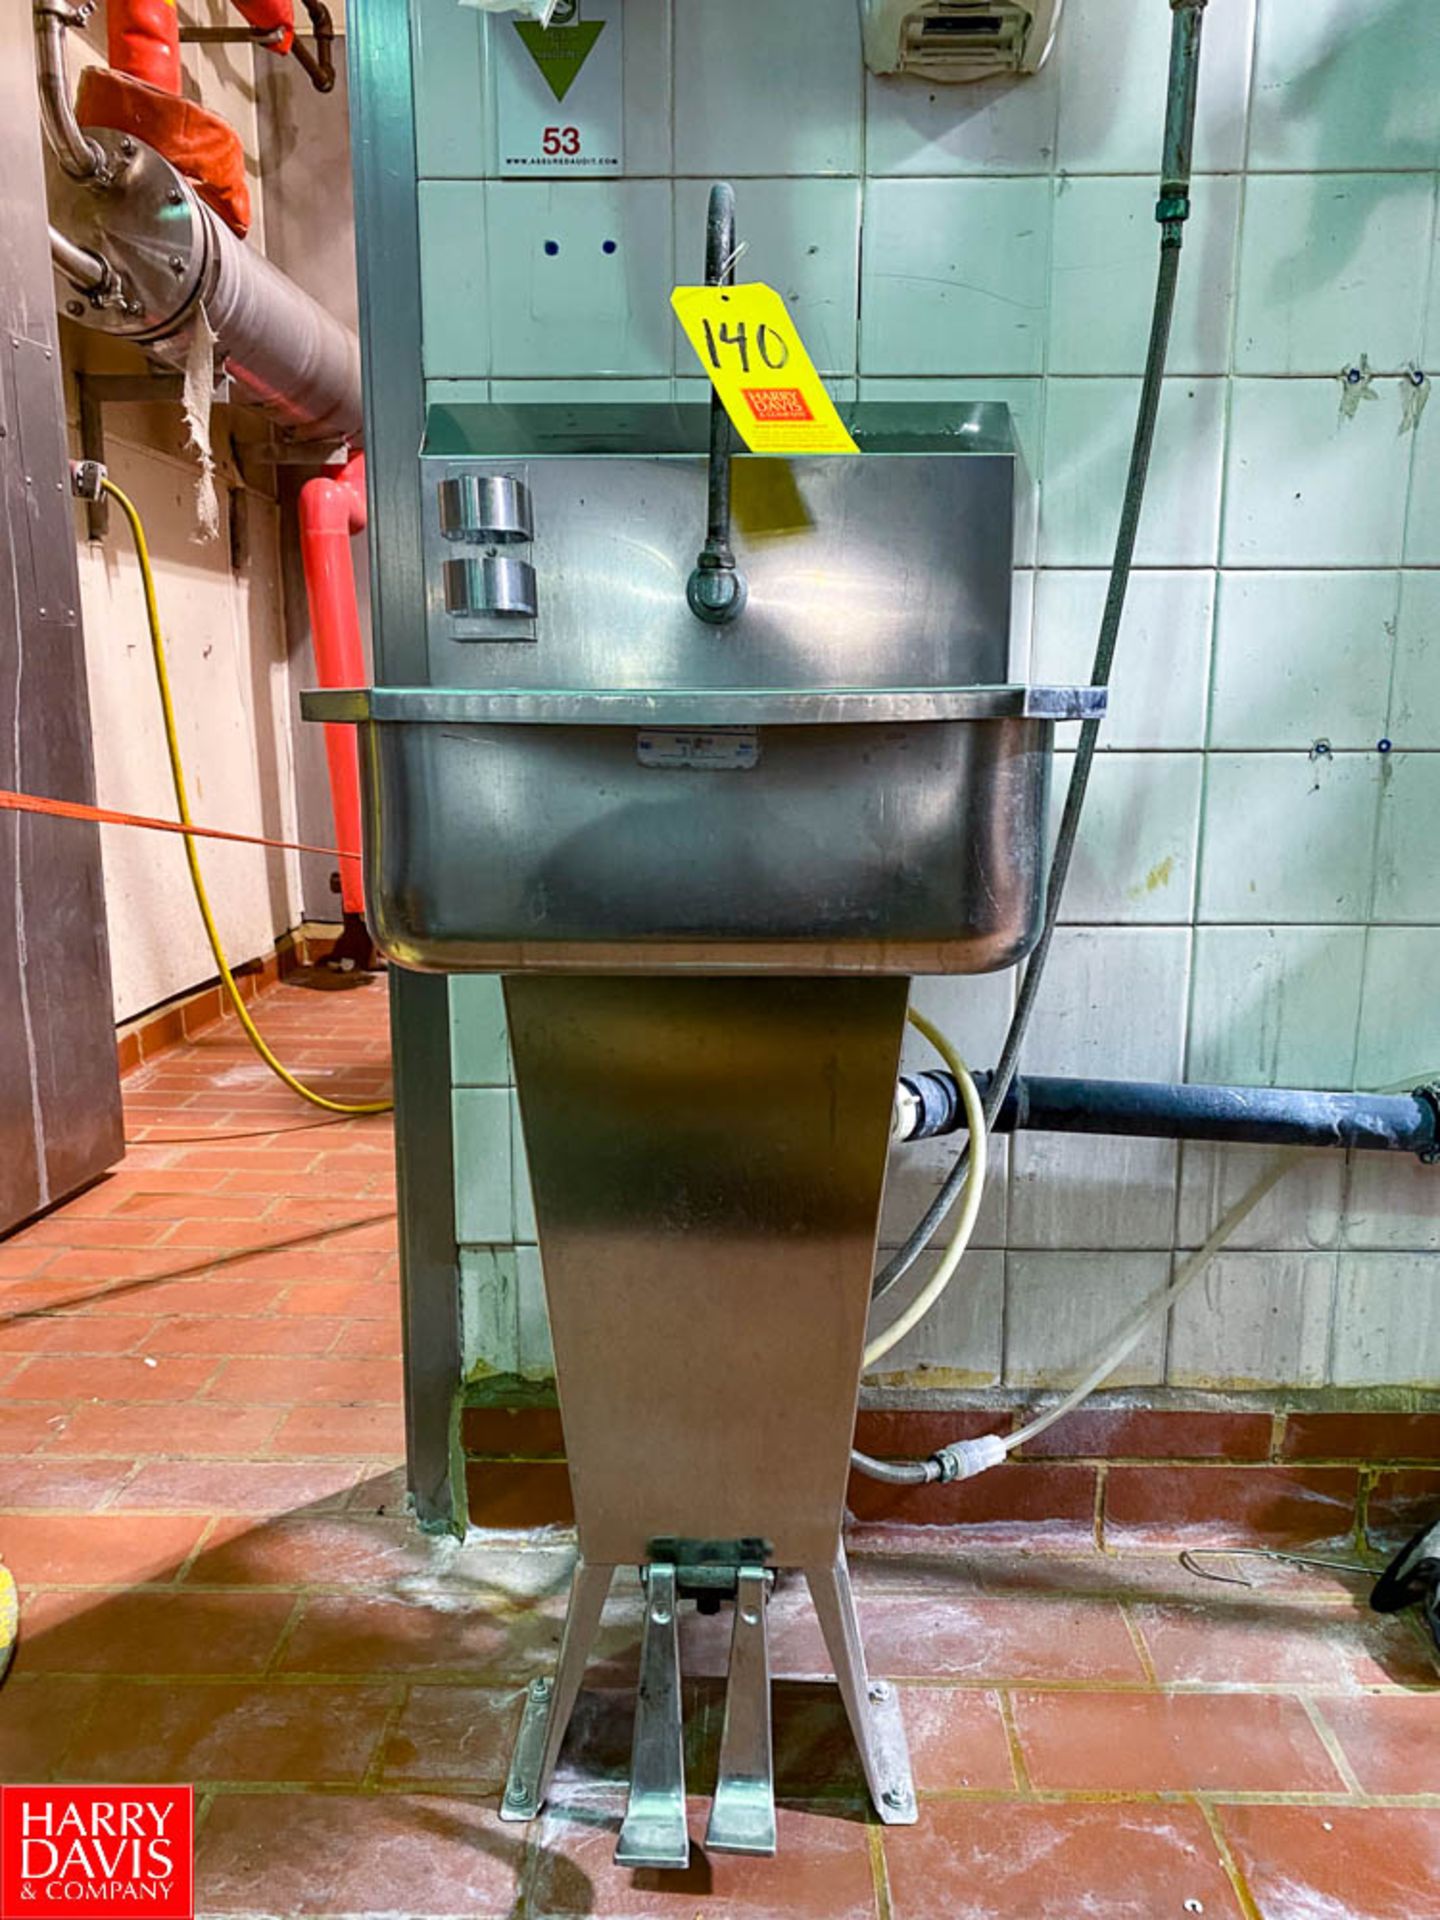 S/S Hand Sink with Foot Controls - Rigging Fee: $100